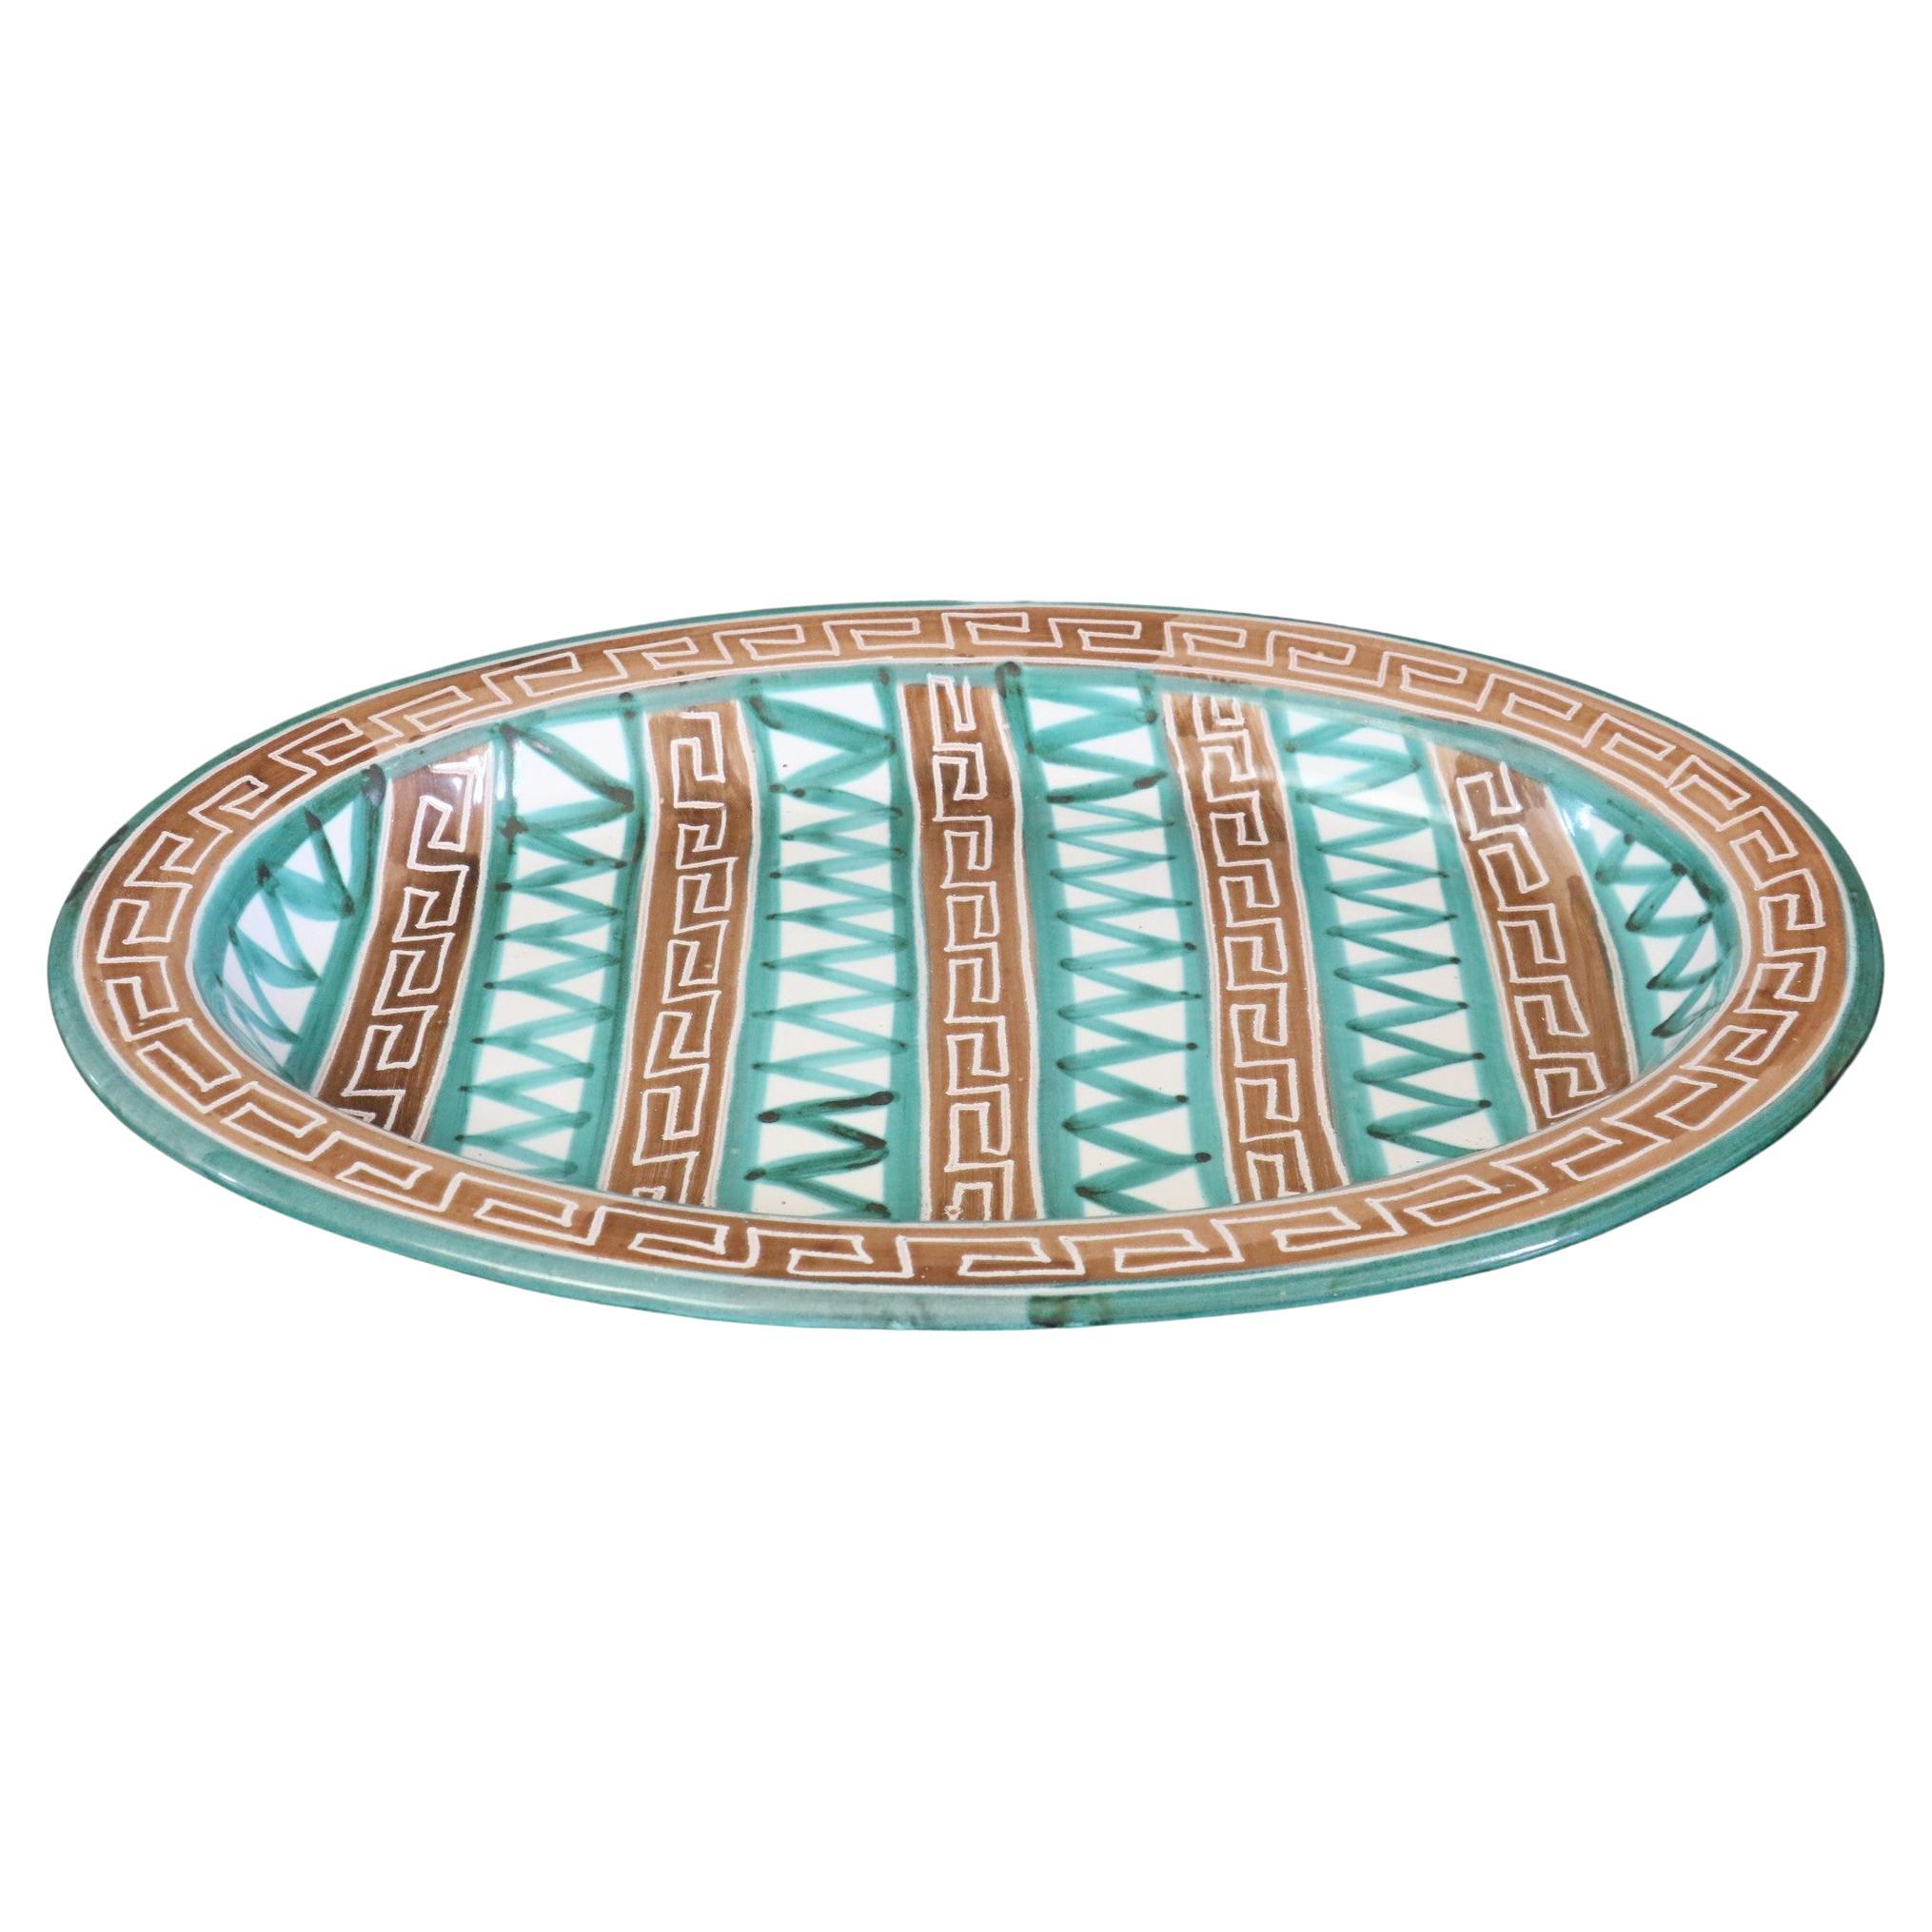 Robert Picault, large oval ceramic dish, plate, signed, Vallauris, France 1950s

Large dish enamelled in white, green and brown tones. This is a beautiful and very large ceramic centerpiece.
Geometric decorations. 
In very good condition.